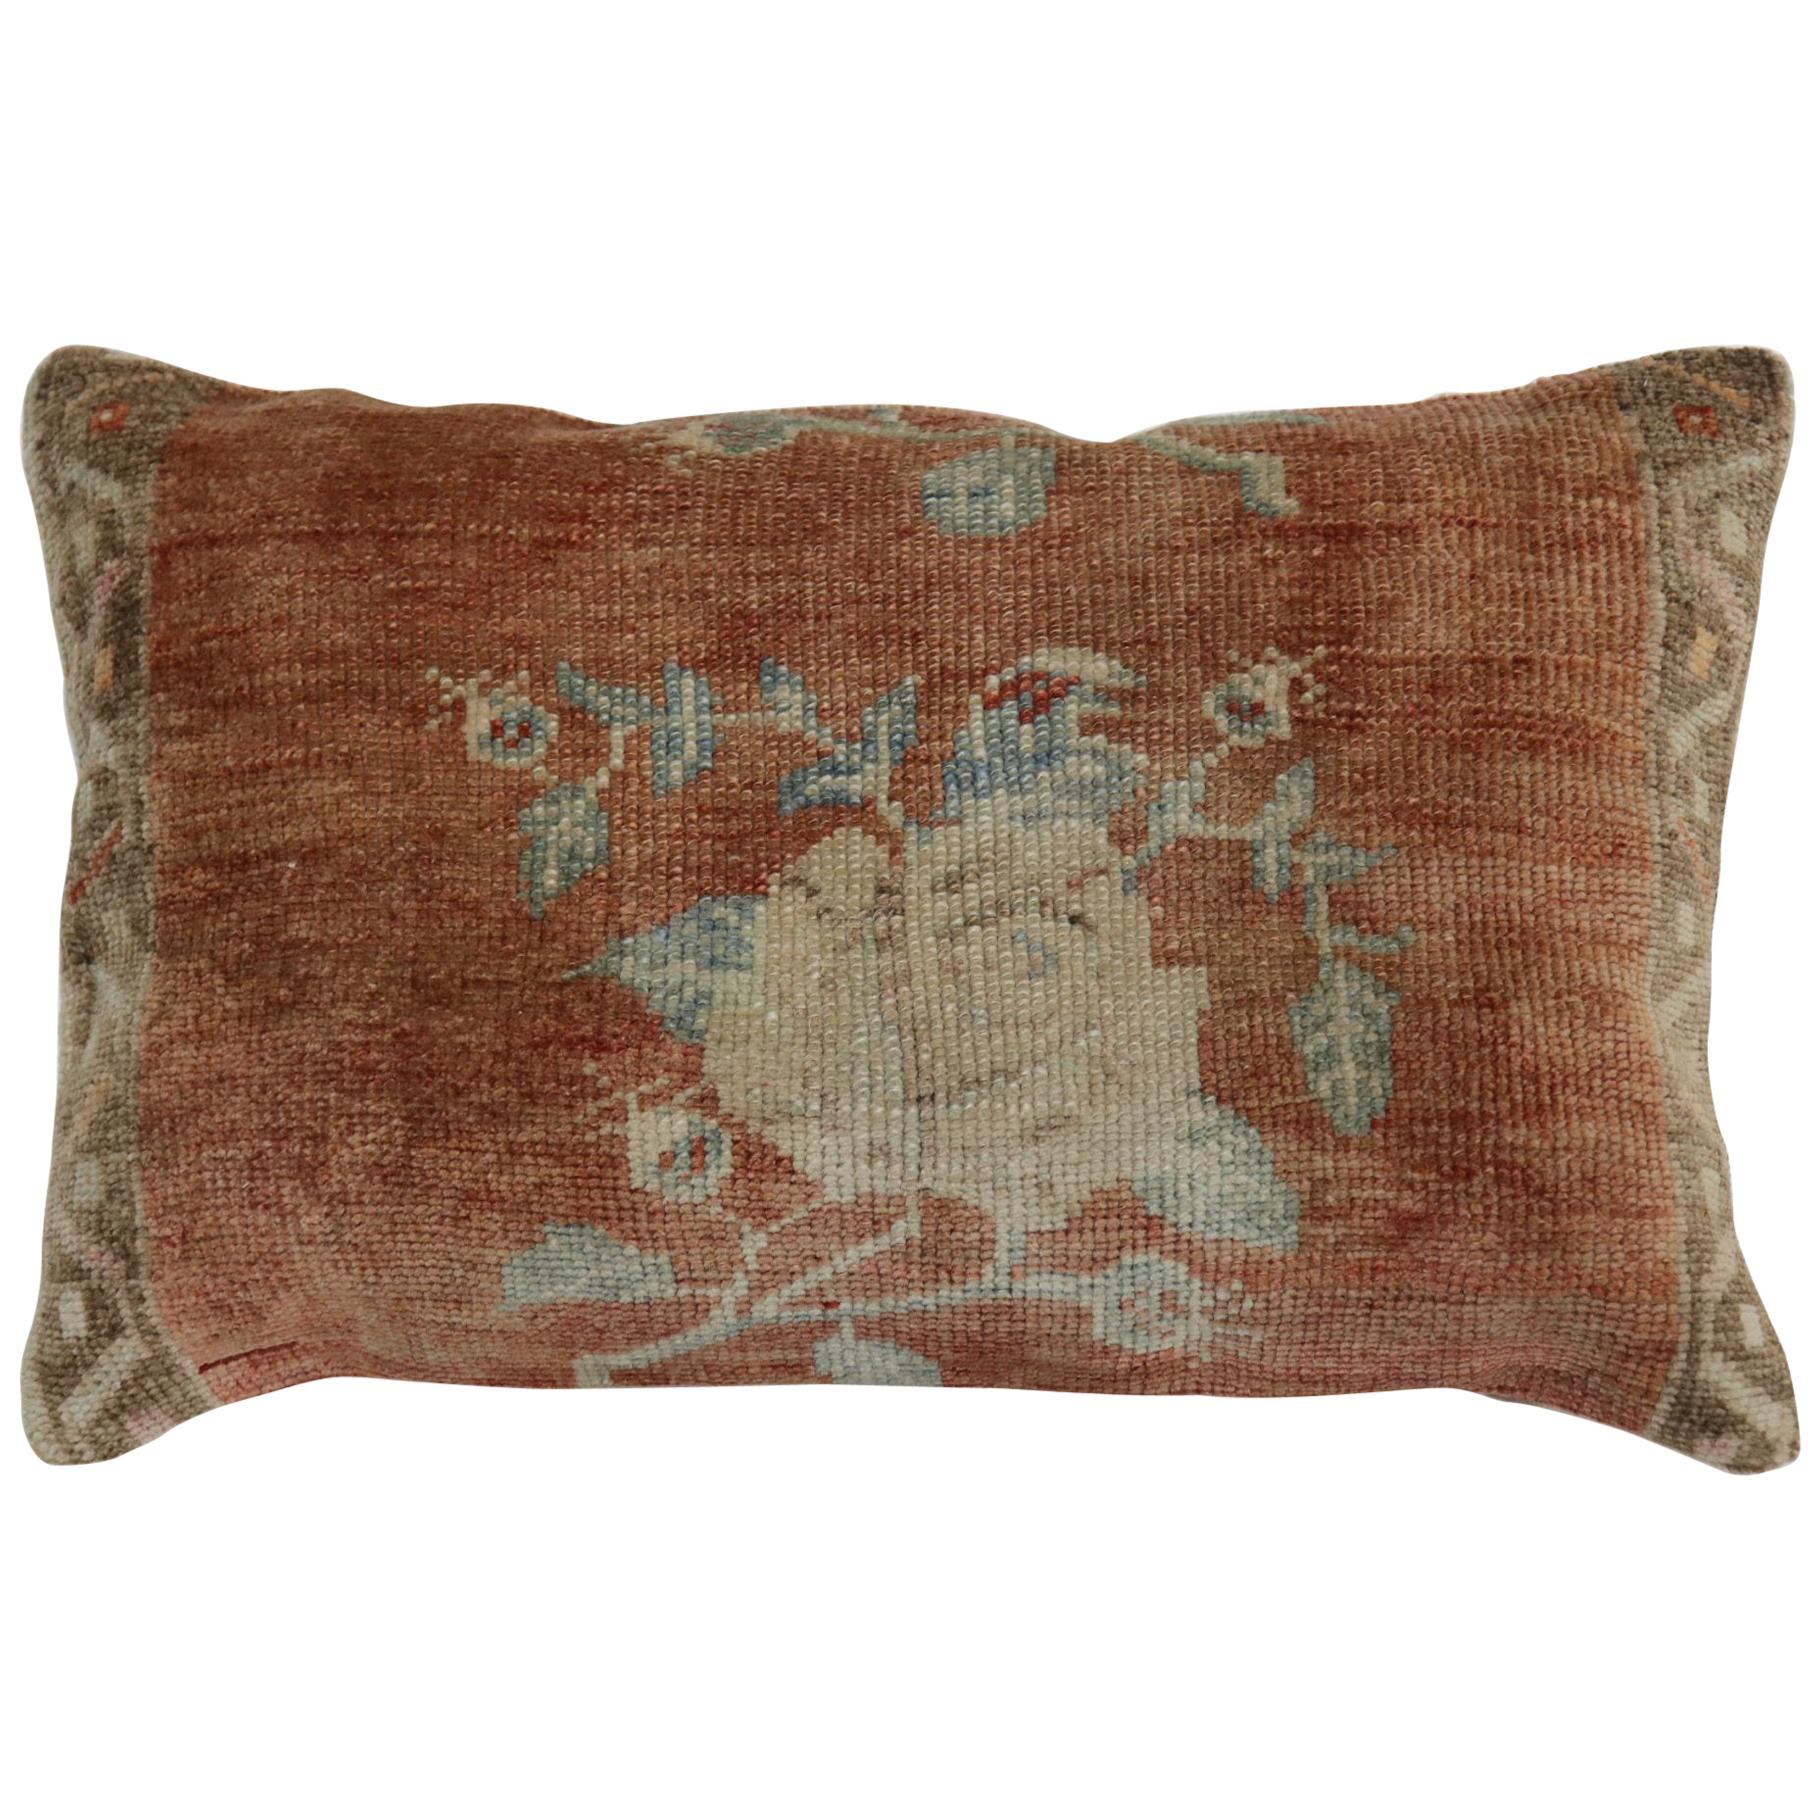 Large Turkish Floor Size Rustic Floral Pillow